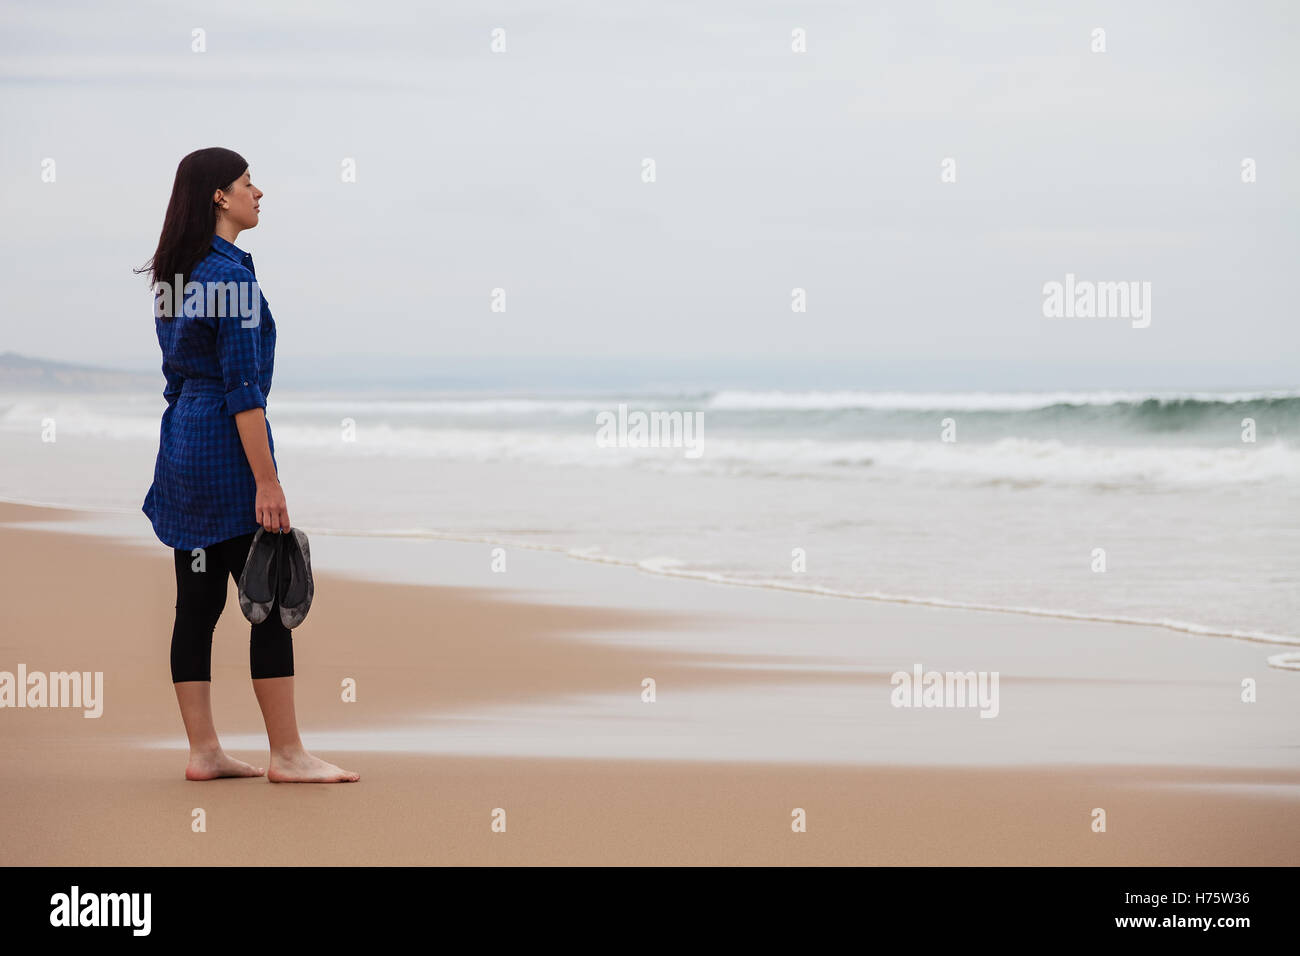 Lonely and depressed woman watching the sea in a deserted beach on an Autumn day. Stock Photo